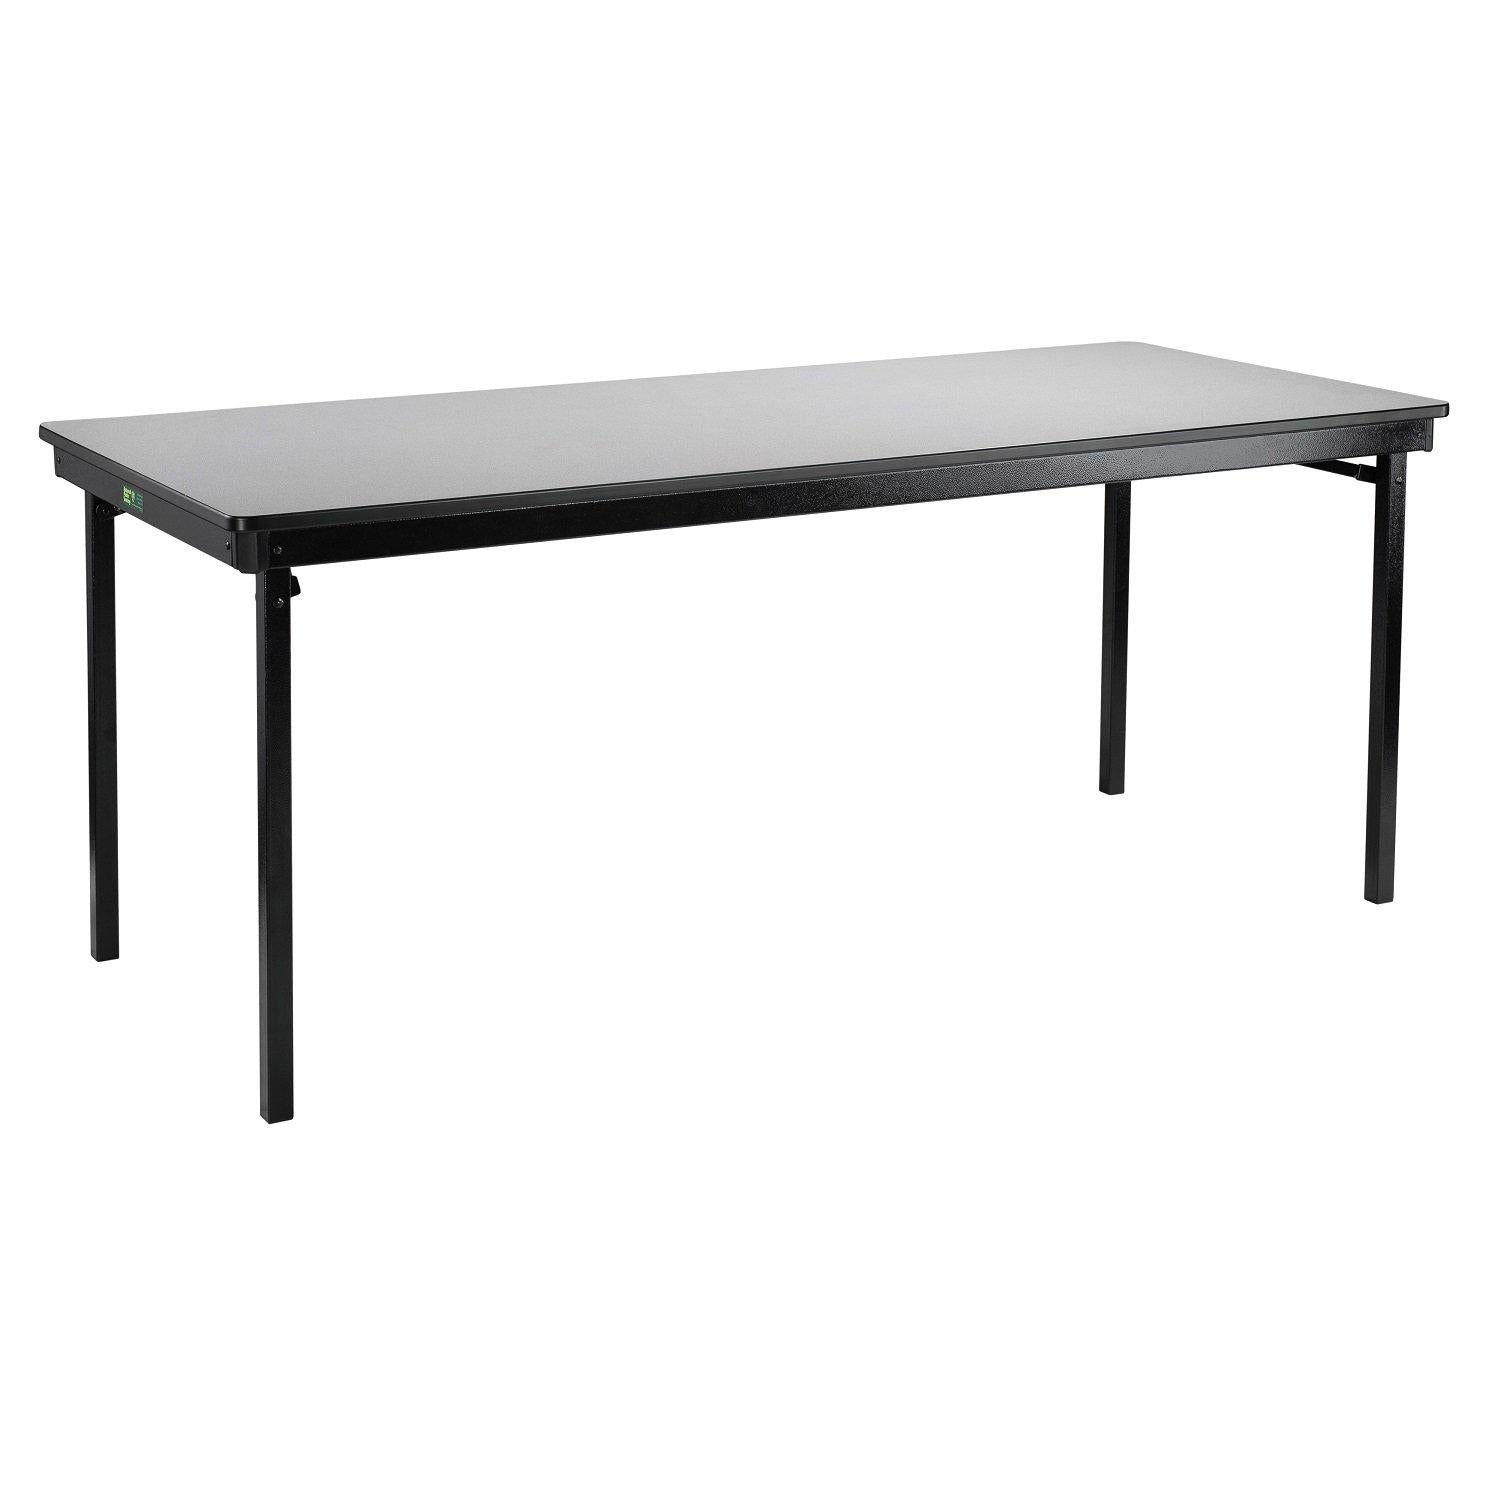 Max Seating Folding Table, 24" x 60", Premium Plywood Core, High Pressure Laminate Top with T-Mold Edging